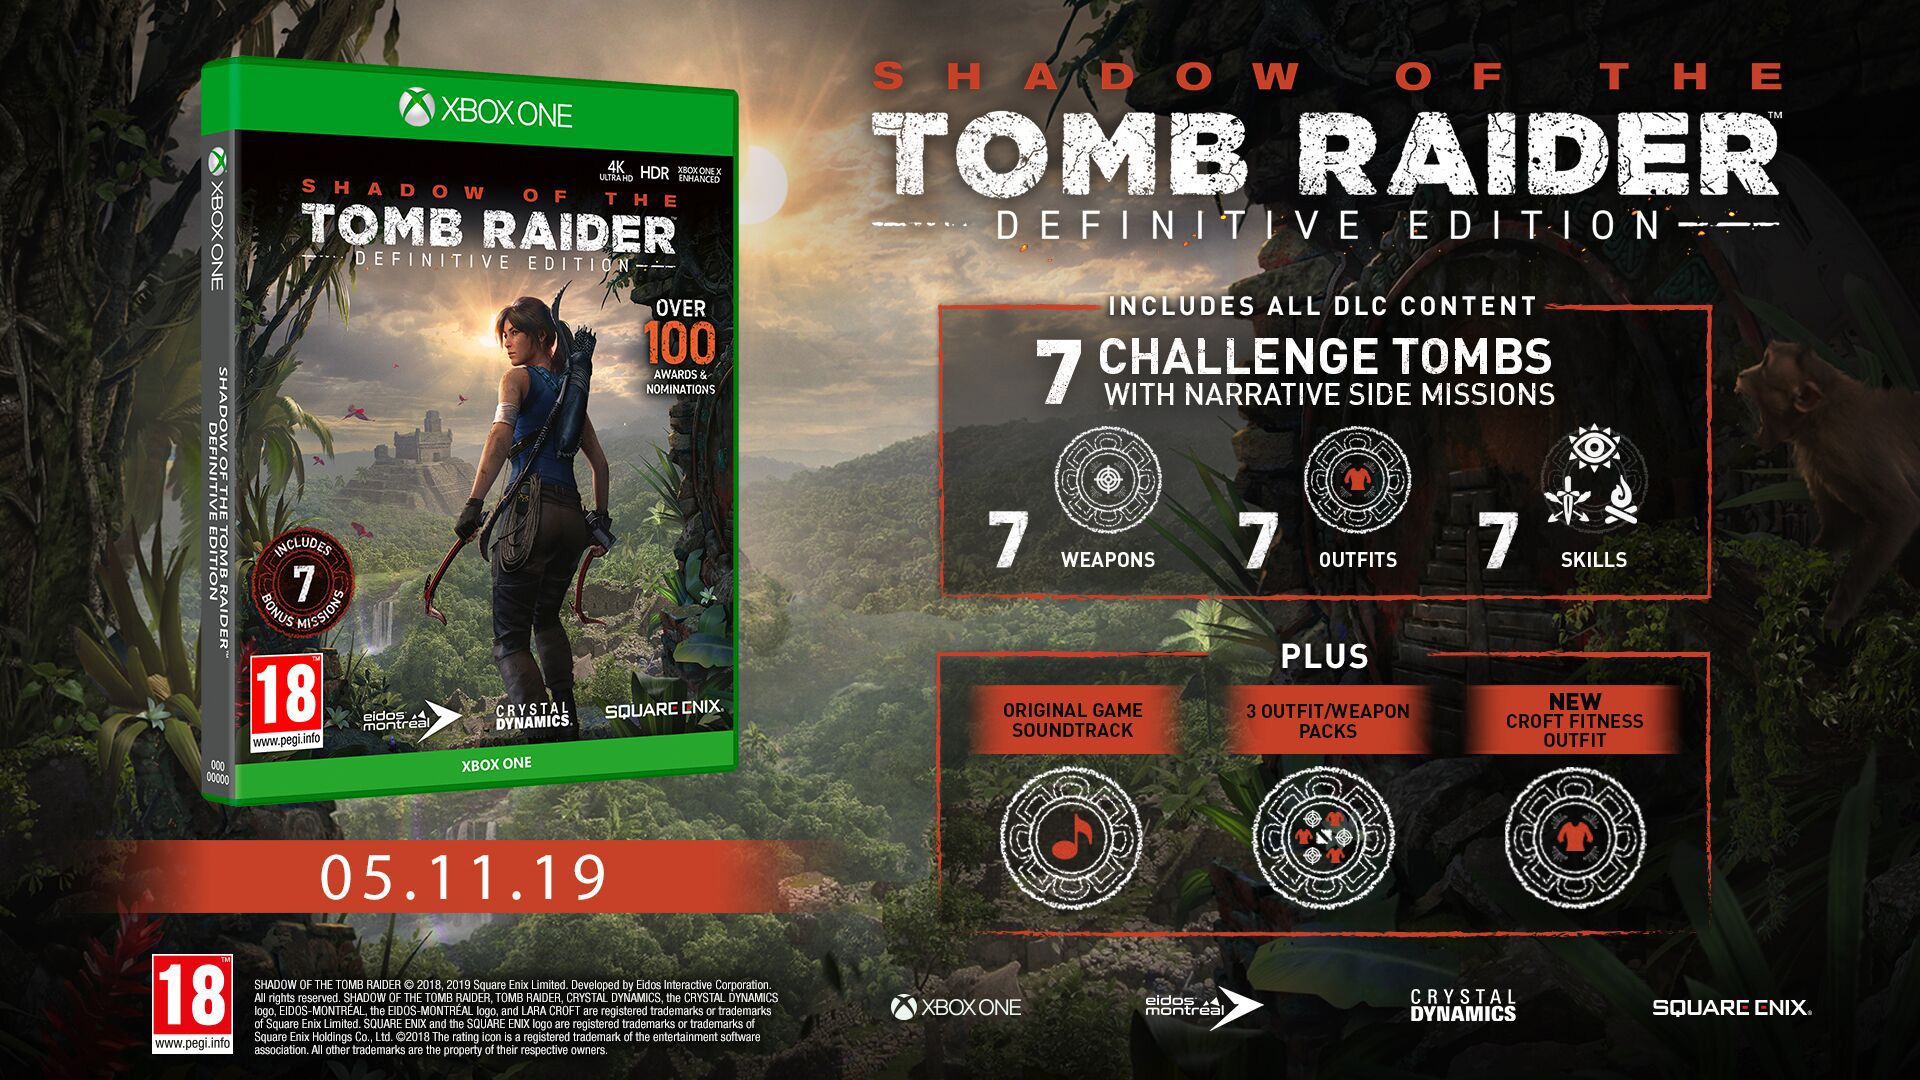 shadow of the tomb raider definitive edition game length